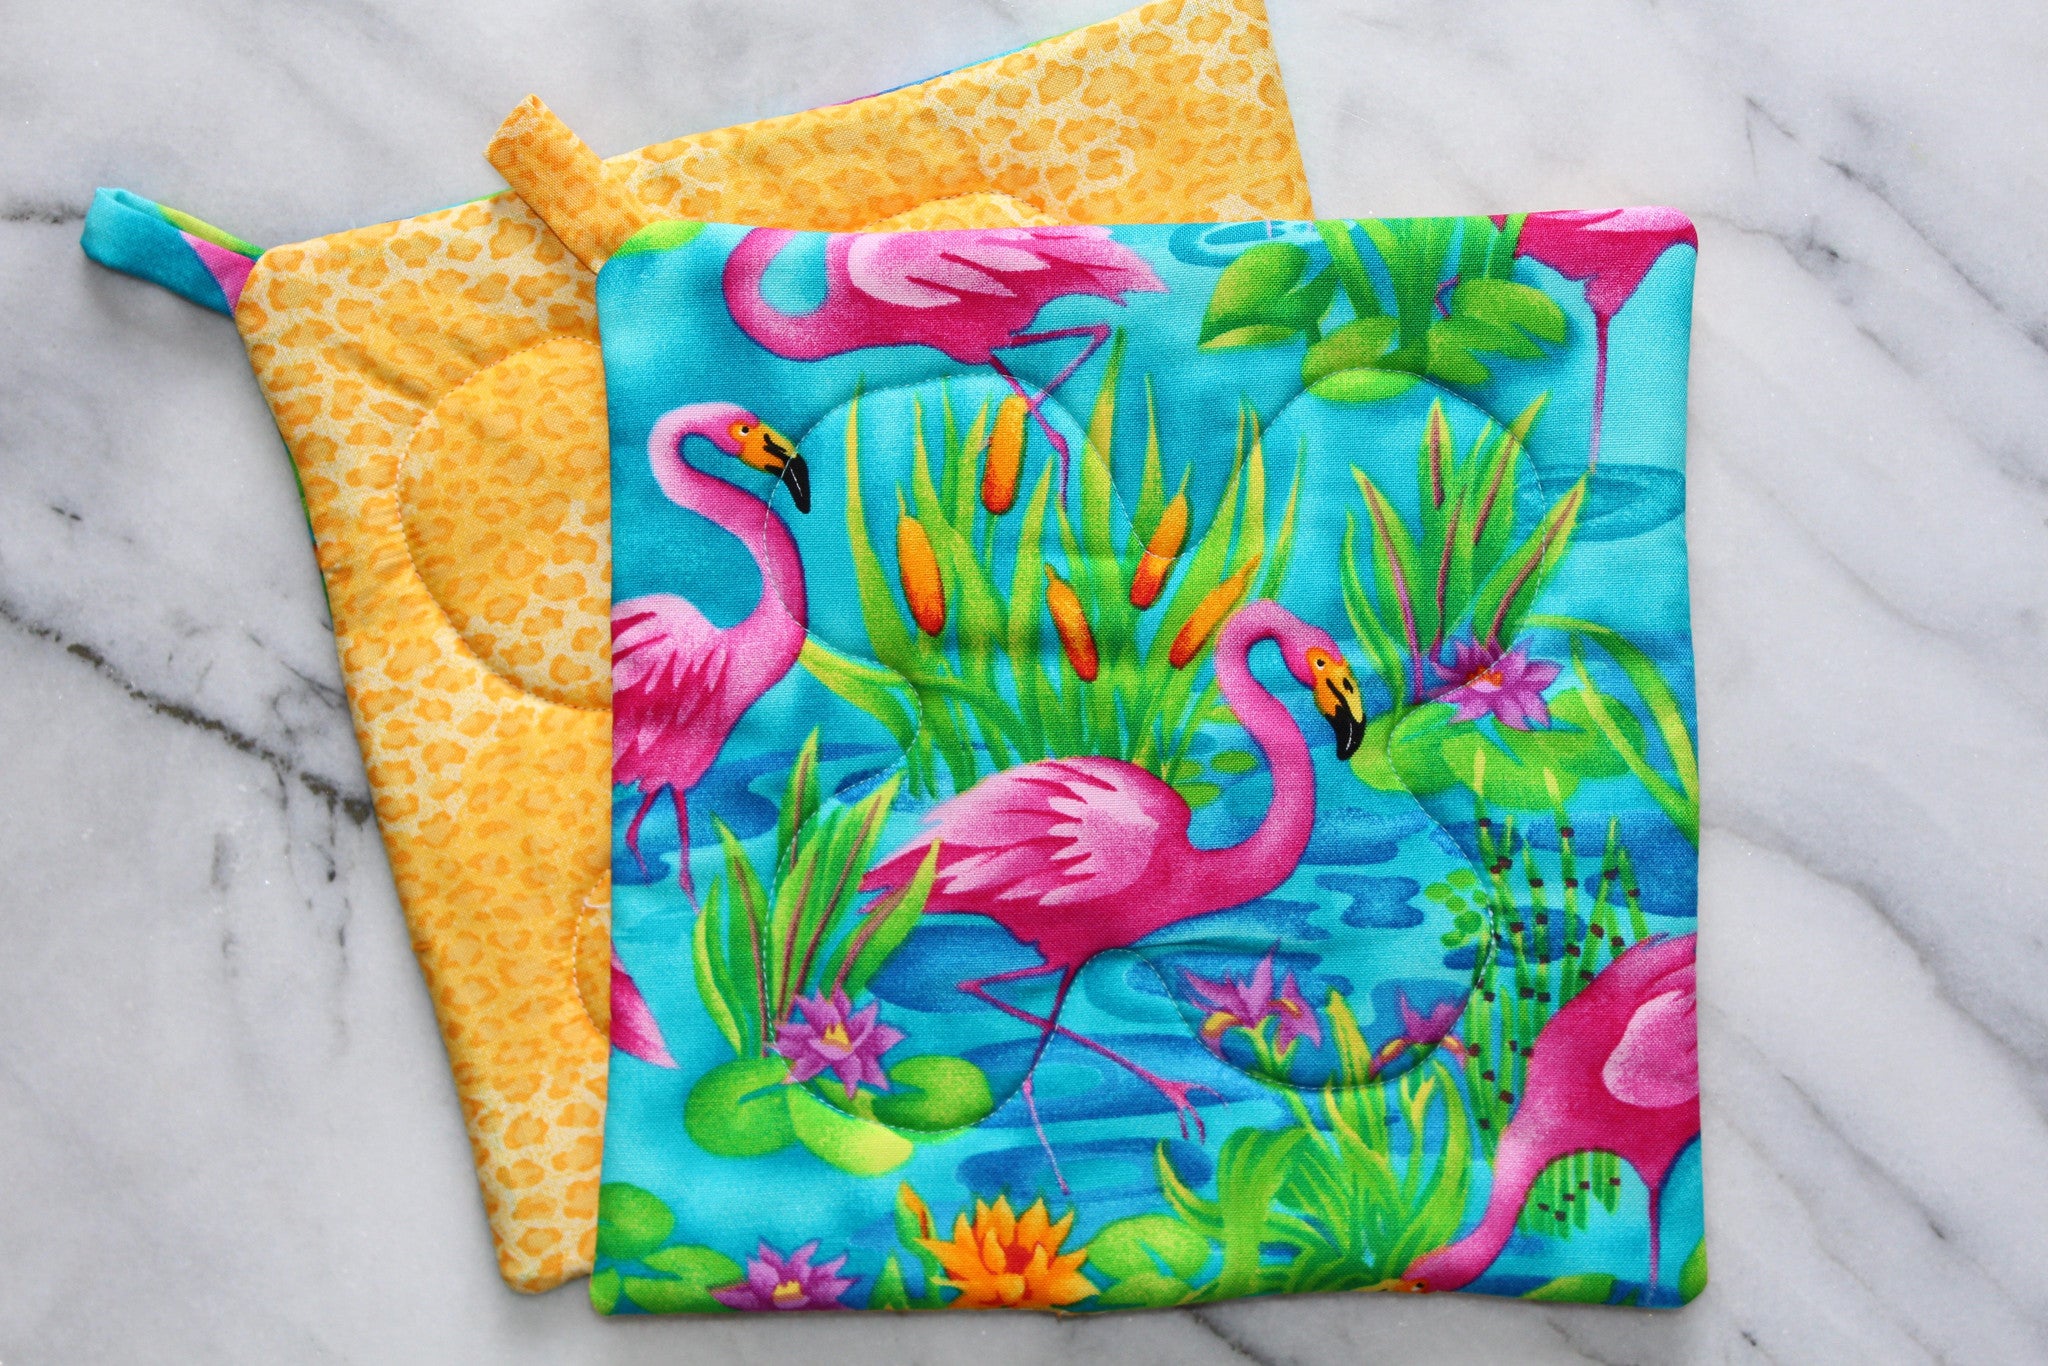 Florida Flamingo Potholder (more colors available)-The Blue Peony-Animal_Flamingo,Category_Pot Holder,Color_Lime Green,Color_Pink,Color_Teal,Department_Kitchen,Pattern_Animal Print,Size_Traditional (Square),Theme_Animal,Theme_Summer,Theme_Tropical